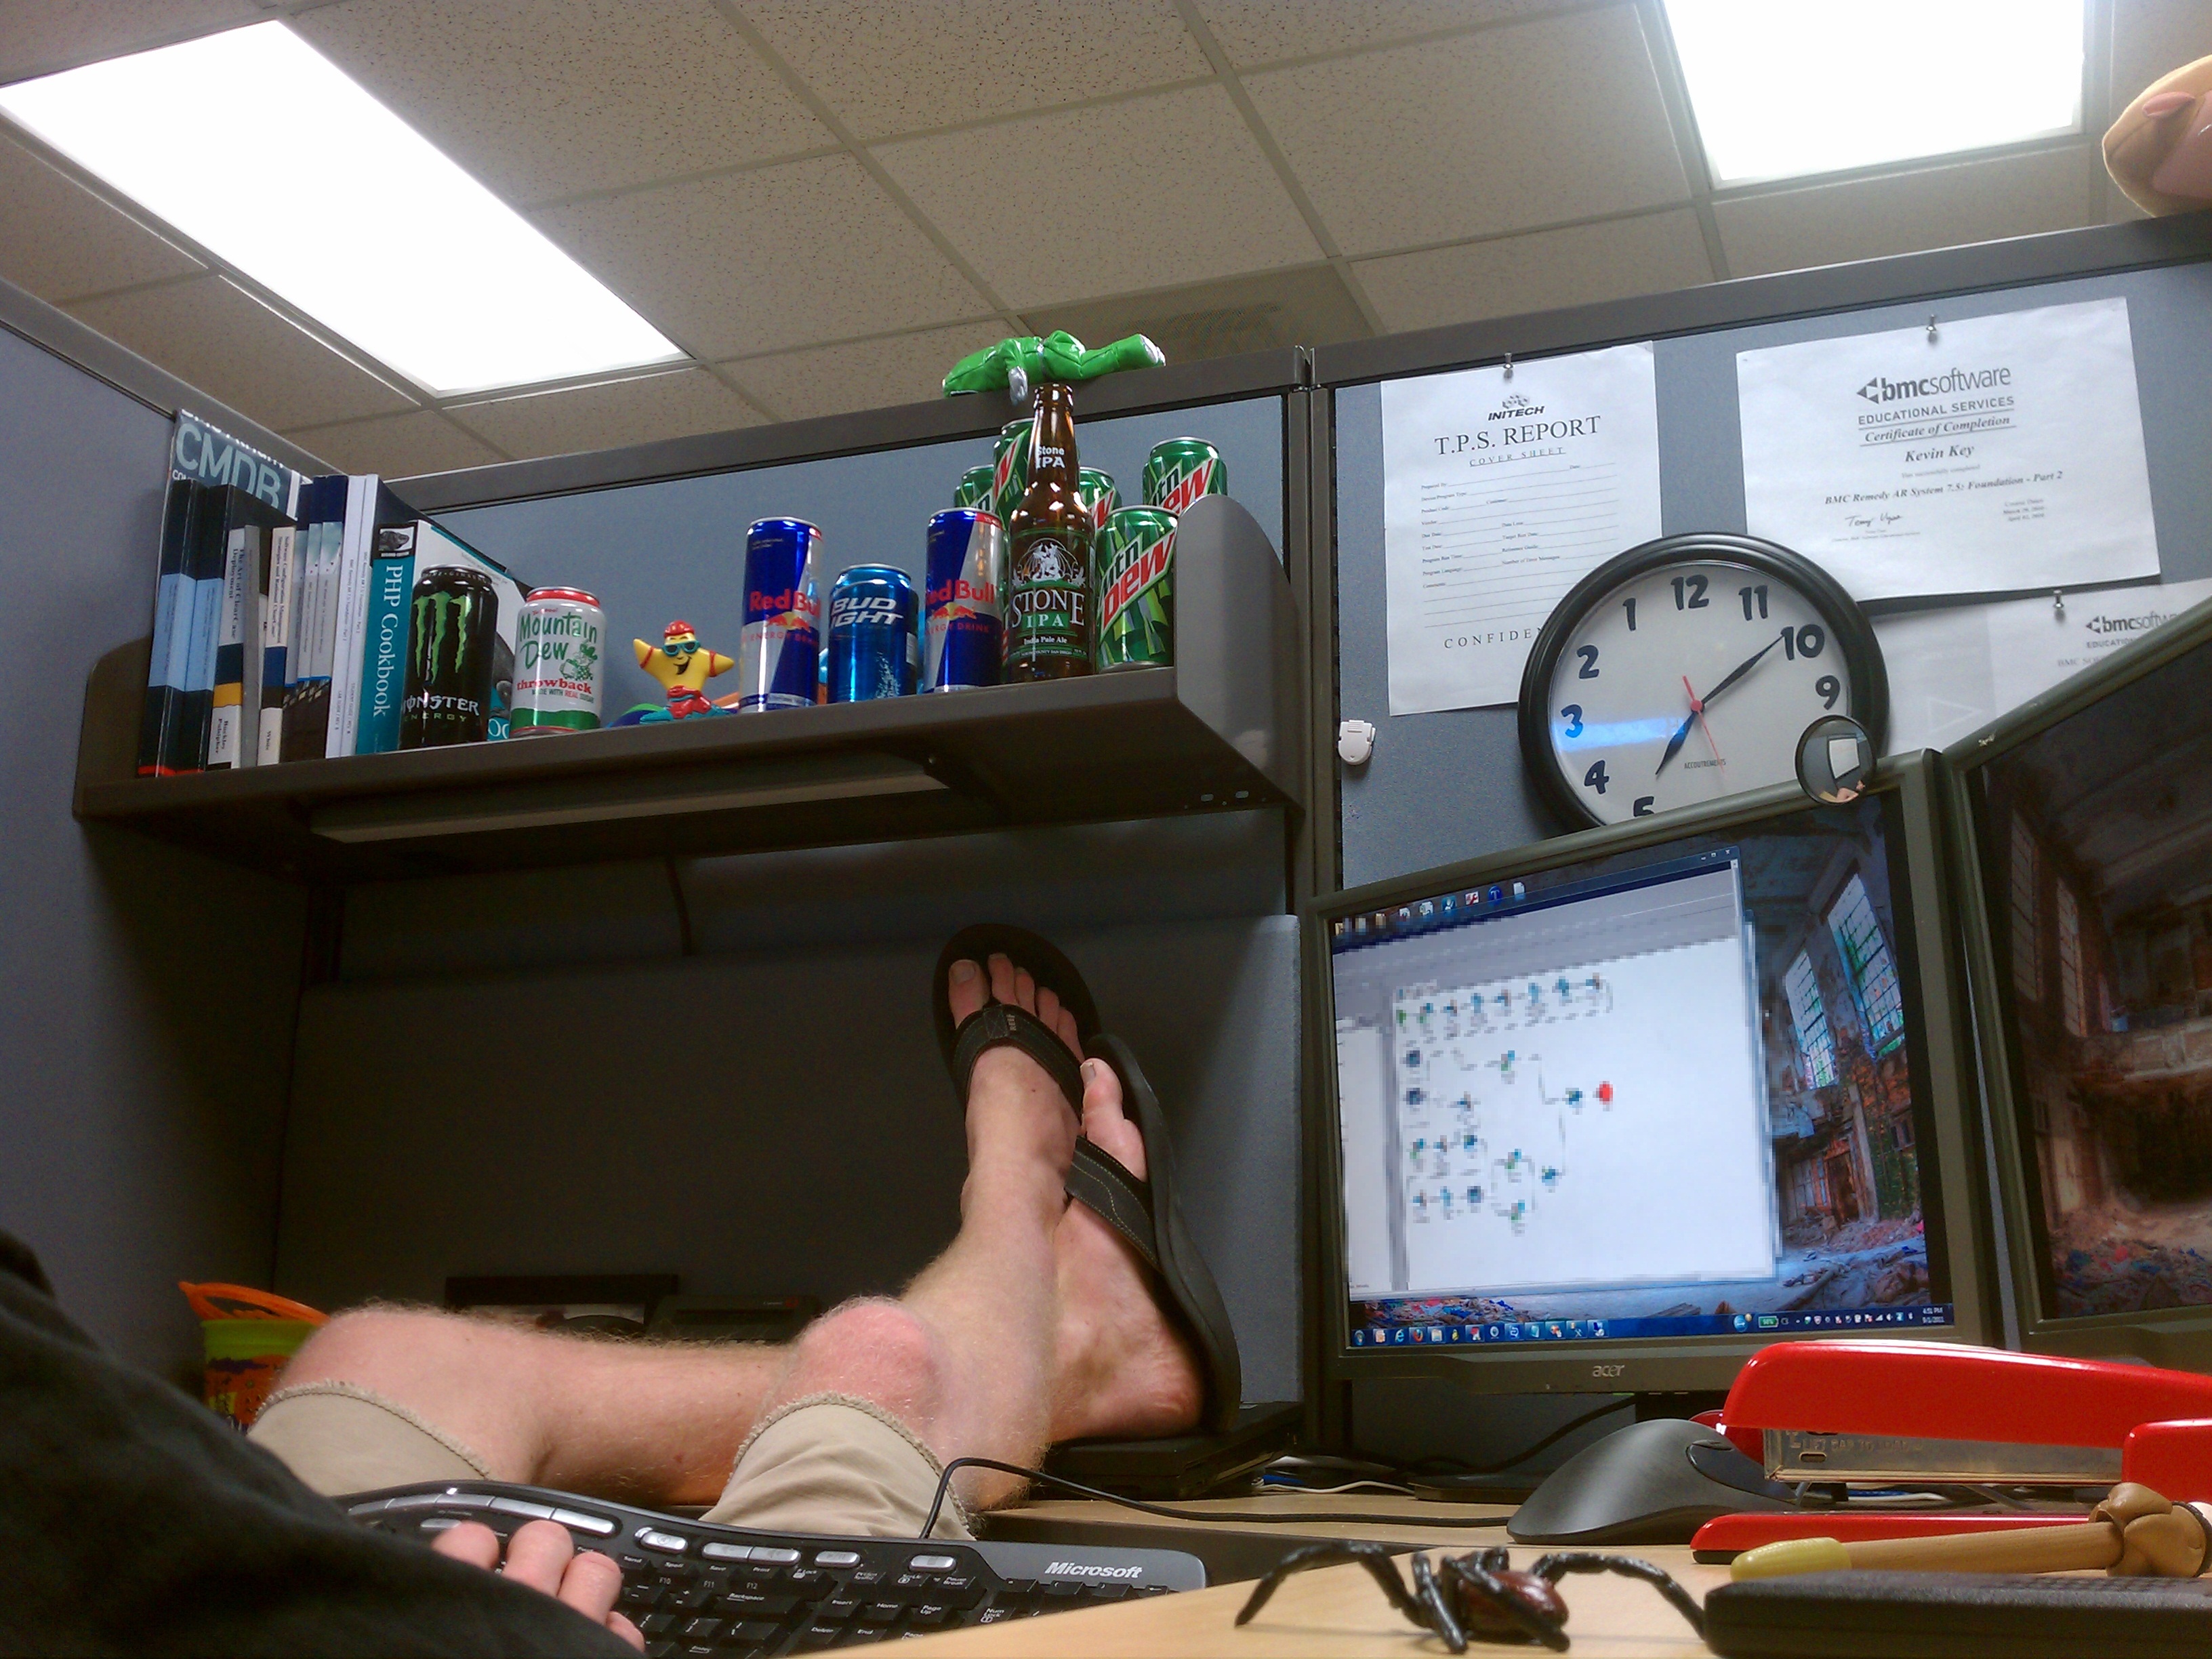 Geek insider, geekinsider, geekinsider. Com,, geek life in the workplace, productivity